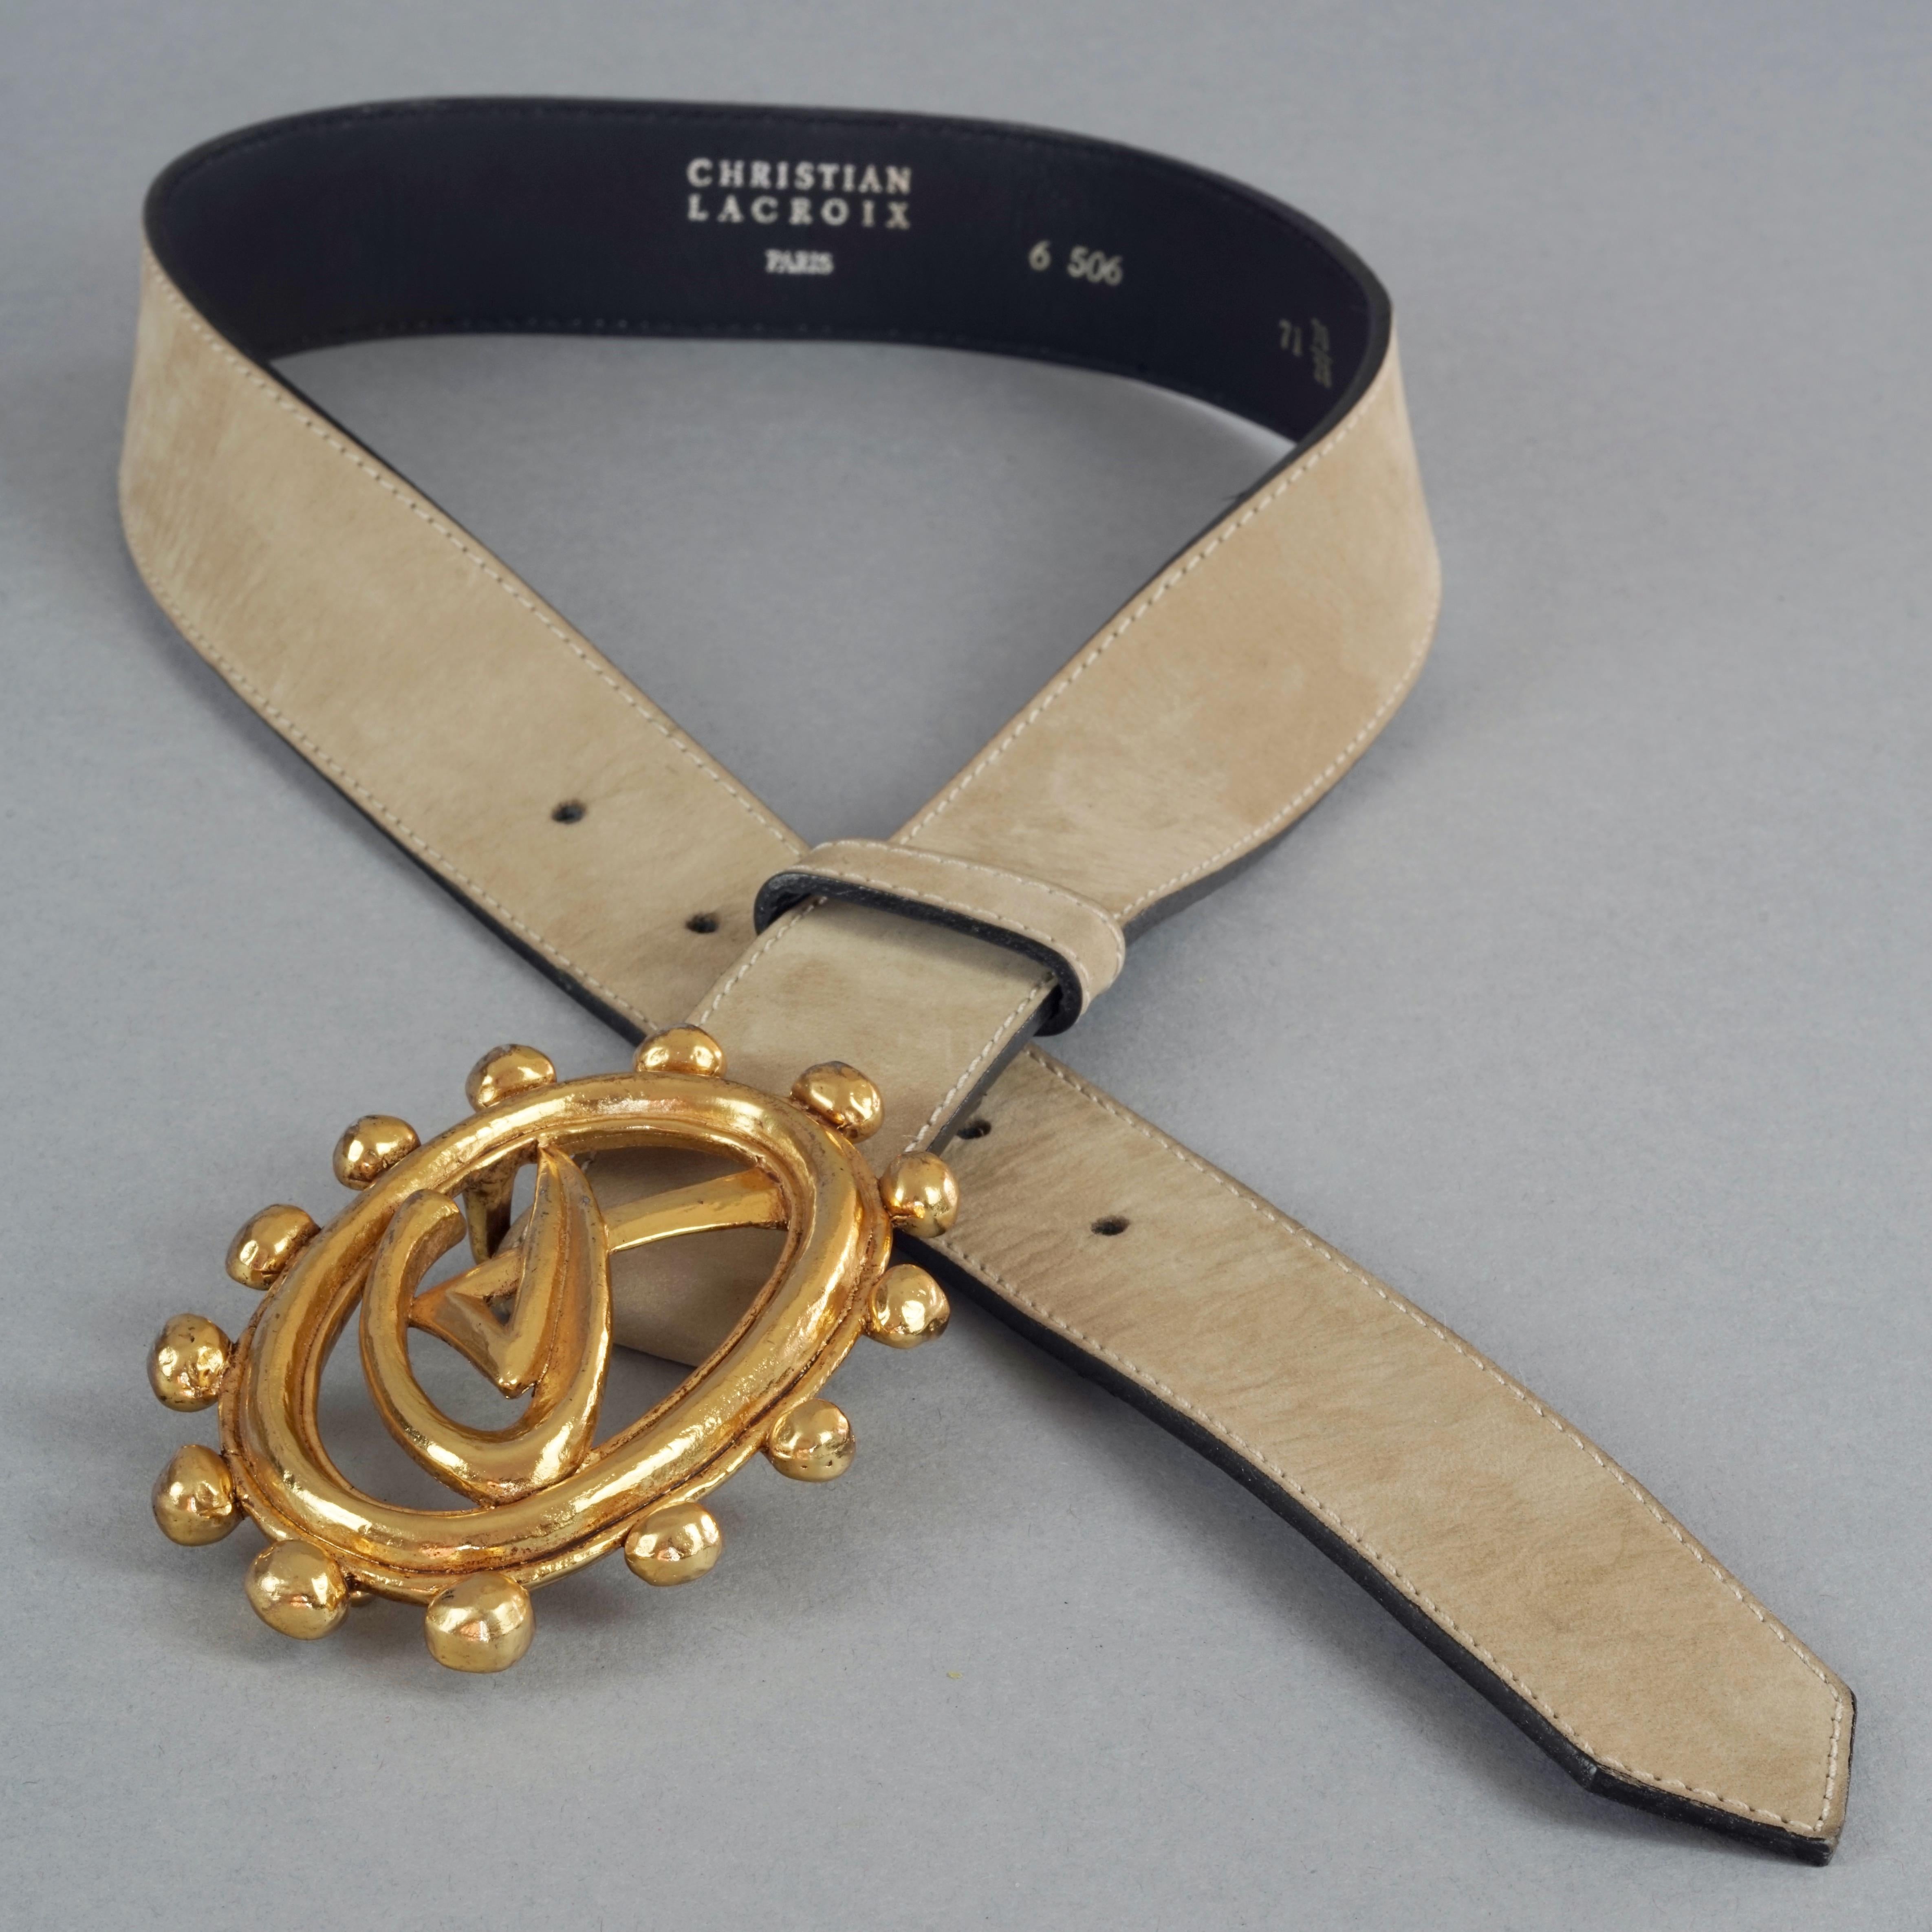 Vintage CHRISTIAN LACROIX Logo Monogram Buckle Brown Suede Leather Belt In Good Condition For Sale In Kingersheim, Alsace